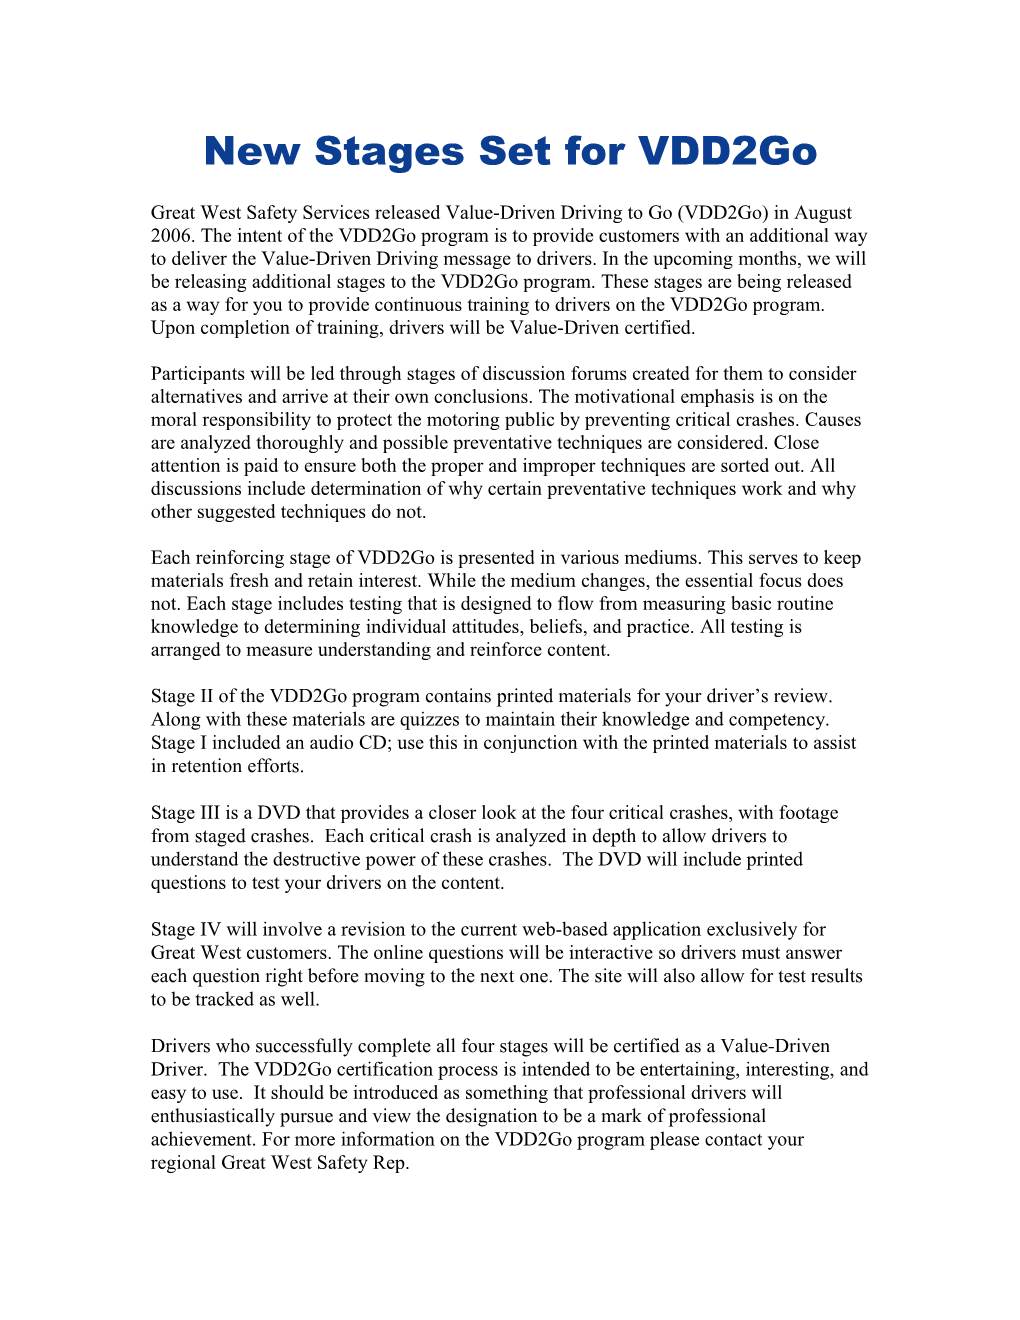 New Stages Set for Vdd2go